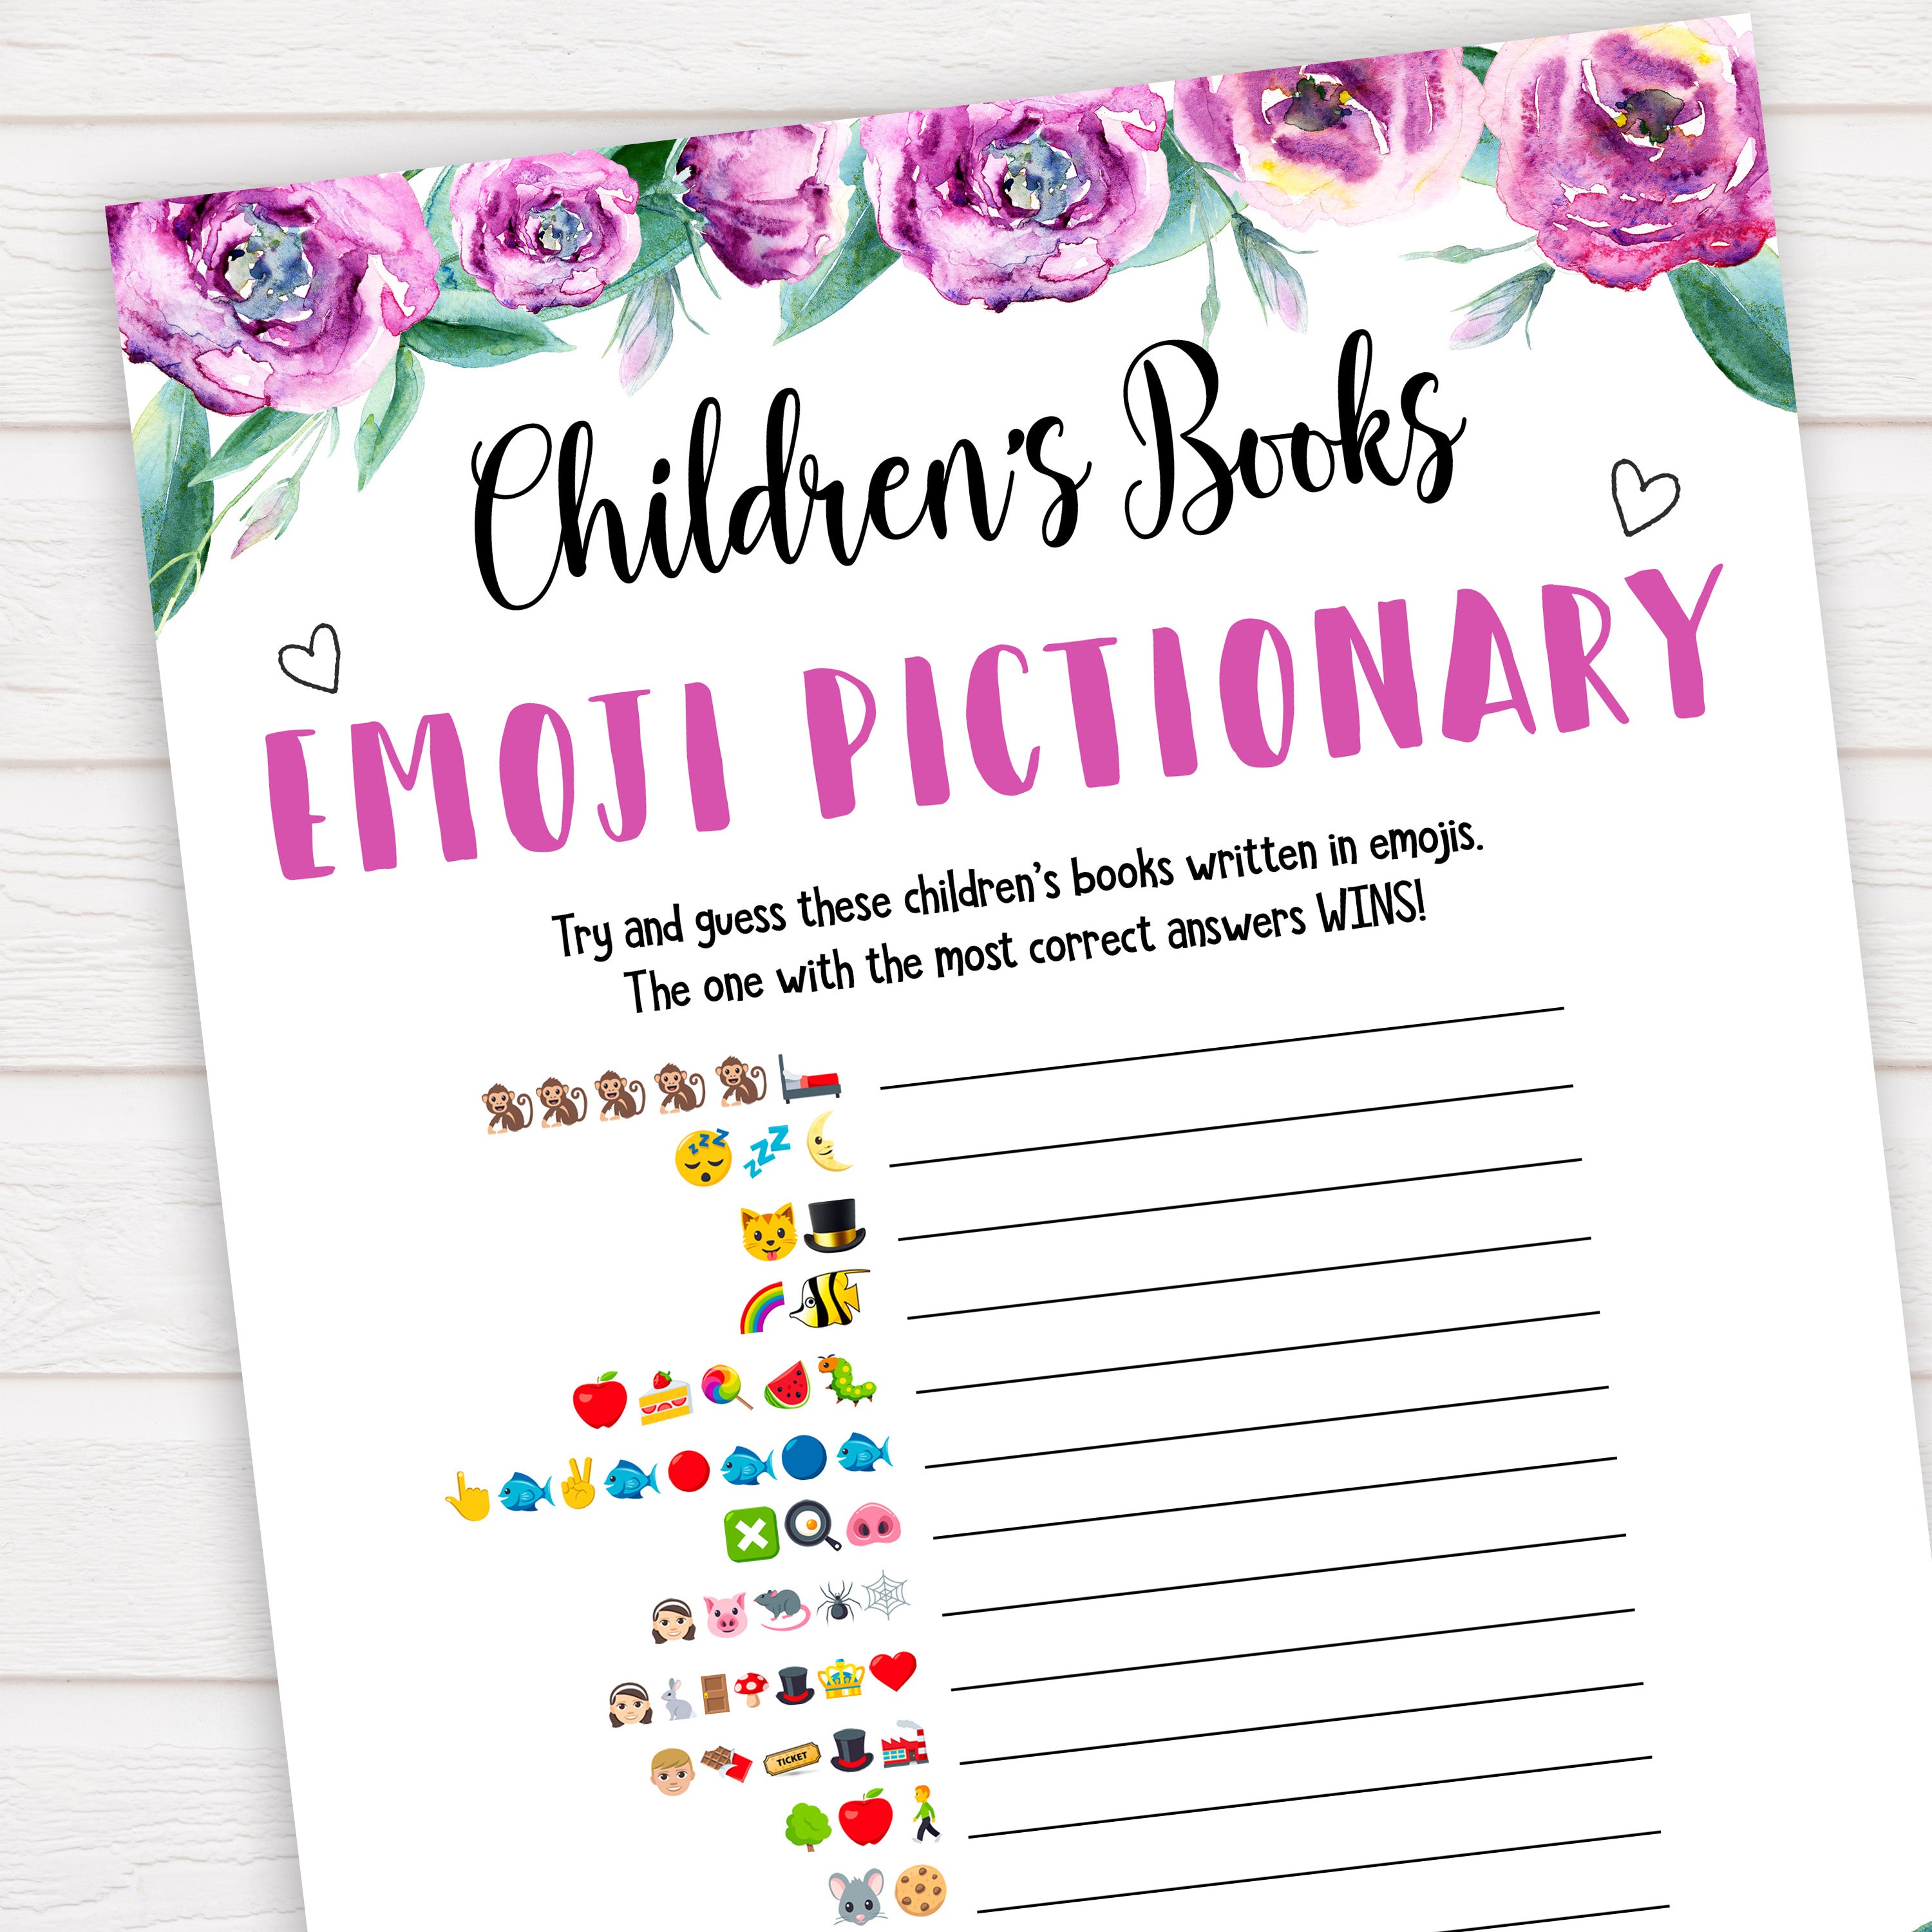 Purple peonies childrens books emoji pictionary baby shower games, printable baby shower games, fun baby shower games, baby shower games, popular baby shower games, floral baby shower games, purple baby shower themes